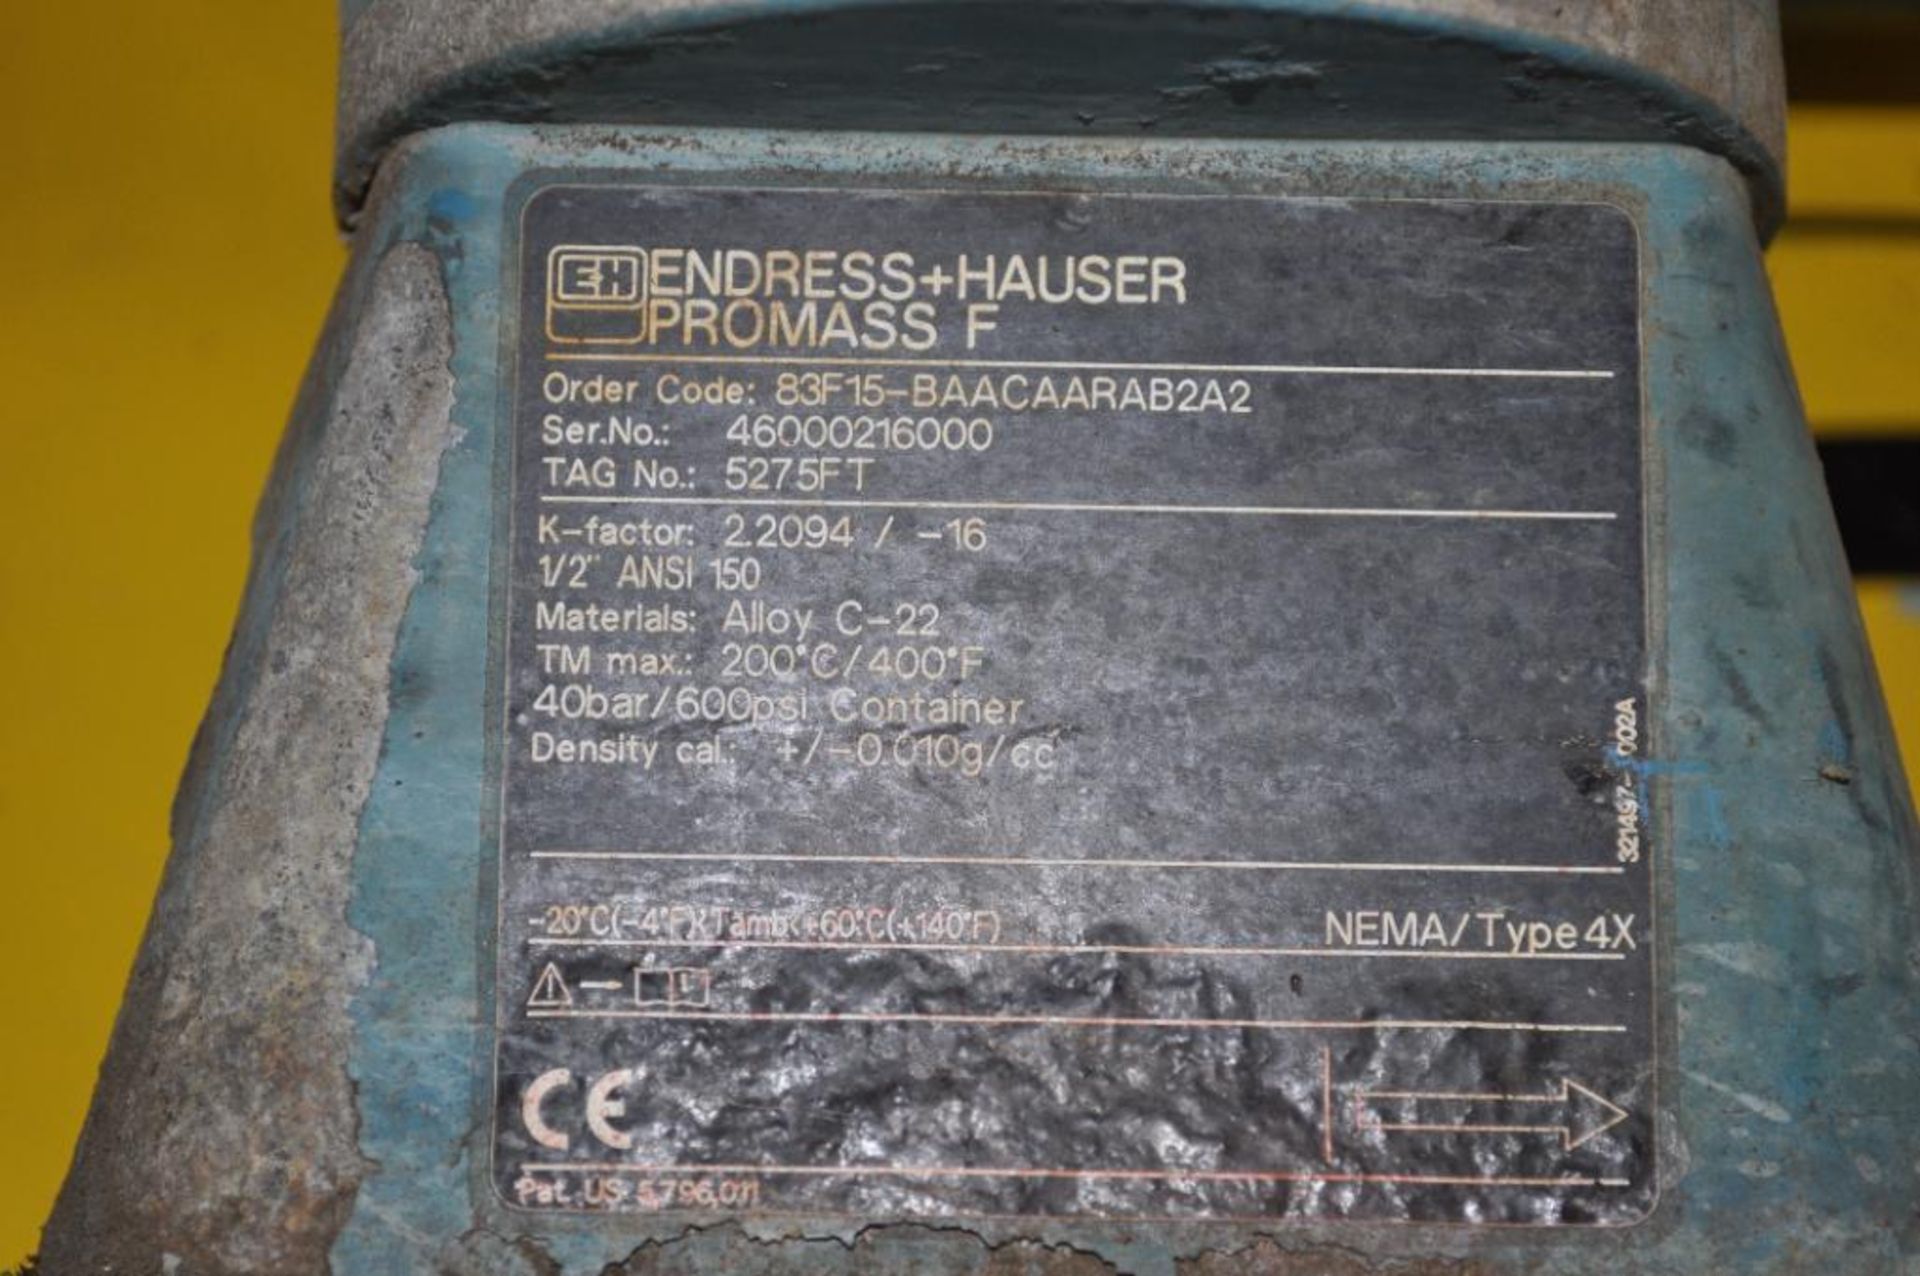 ENDRESS+HAUSER PROLINE PROMASS F CORIOLIS FLOW METER, MATERIAL: ALLOY C-22, 1/2'' ANSI 150, TAG NO. - Image 2 of 4